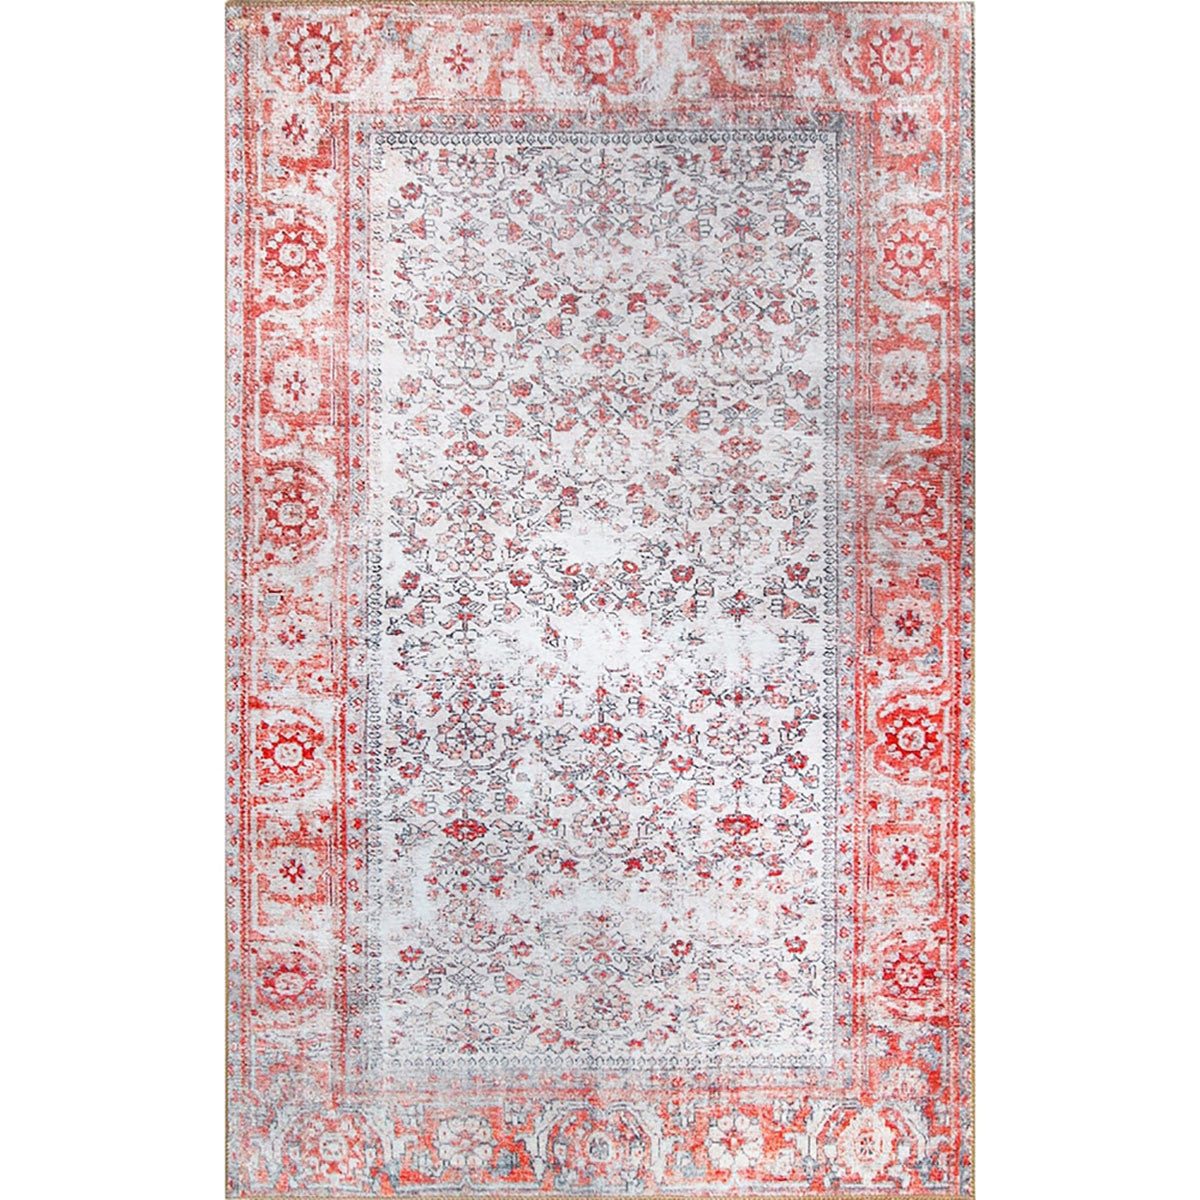 6' X 9' Berry Red Oriental Power Loom Stain Resistant Area Rug